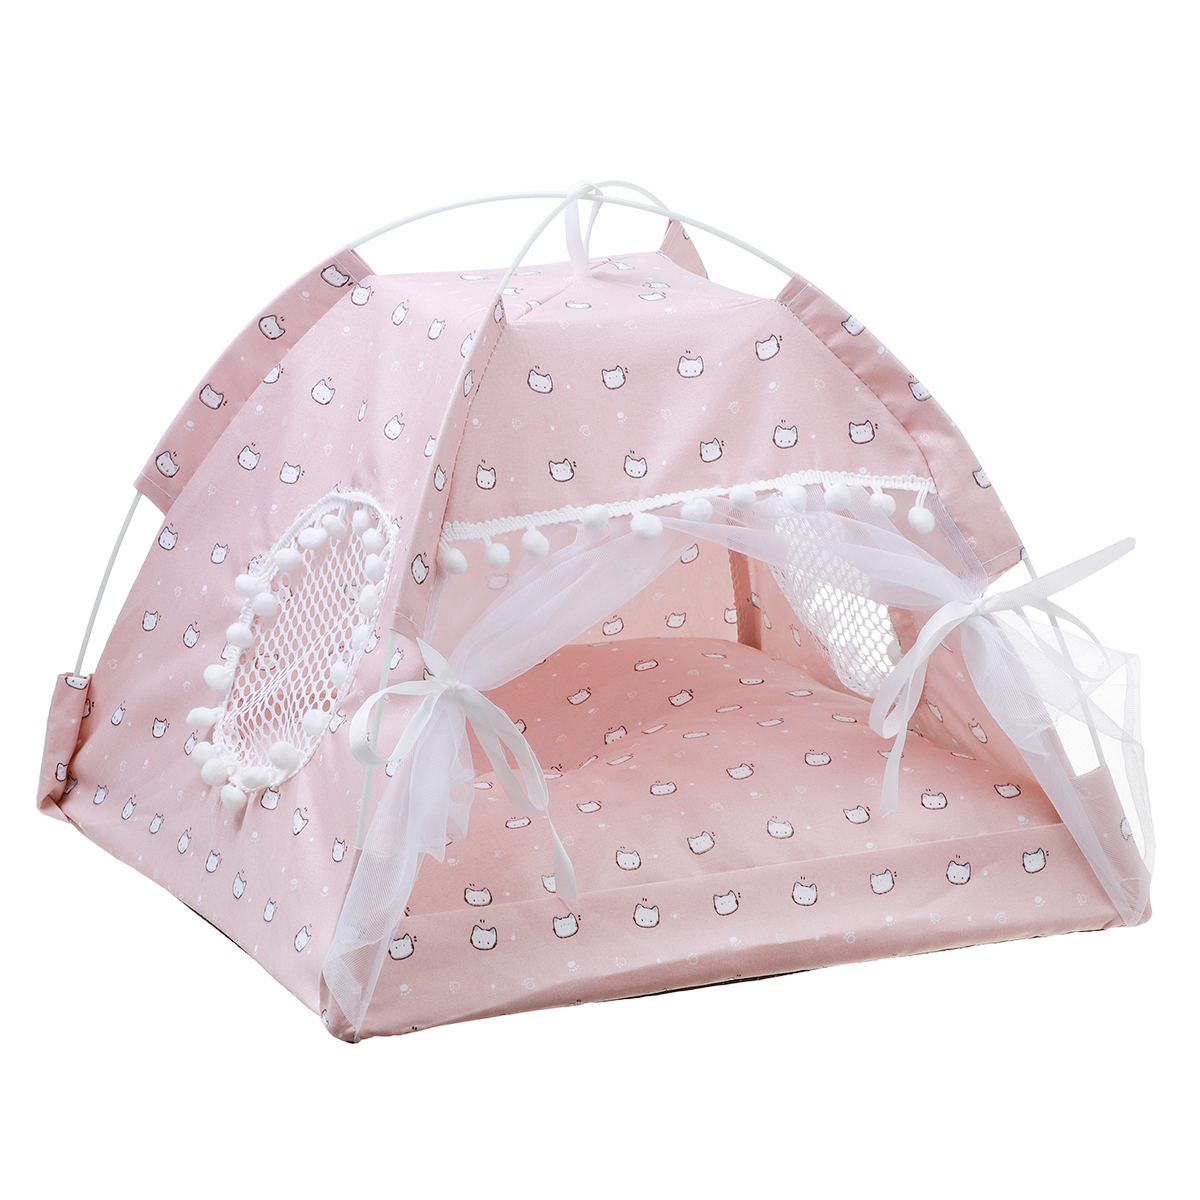 Pet-Tent-Cat-Bed-Puppy-House-Cushion-Pad-Bed-Flamingo-Pattern-Indo-1825833-6